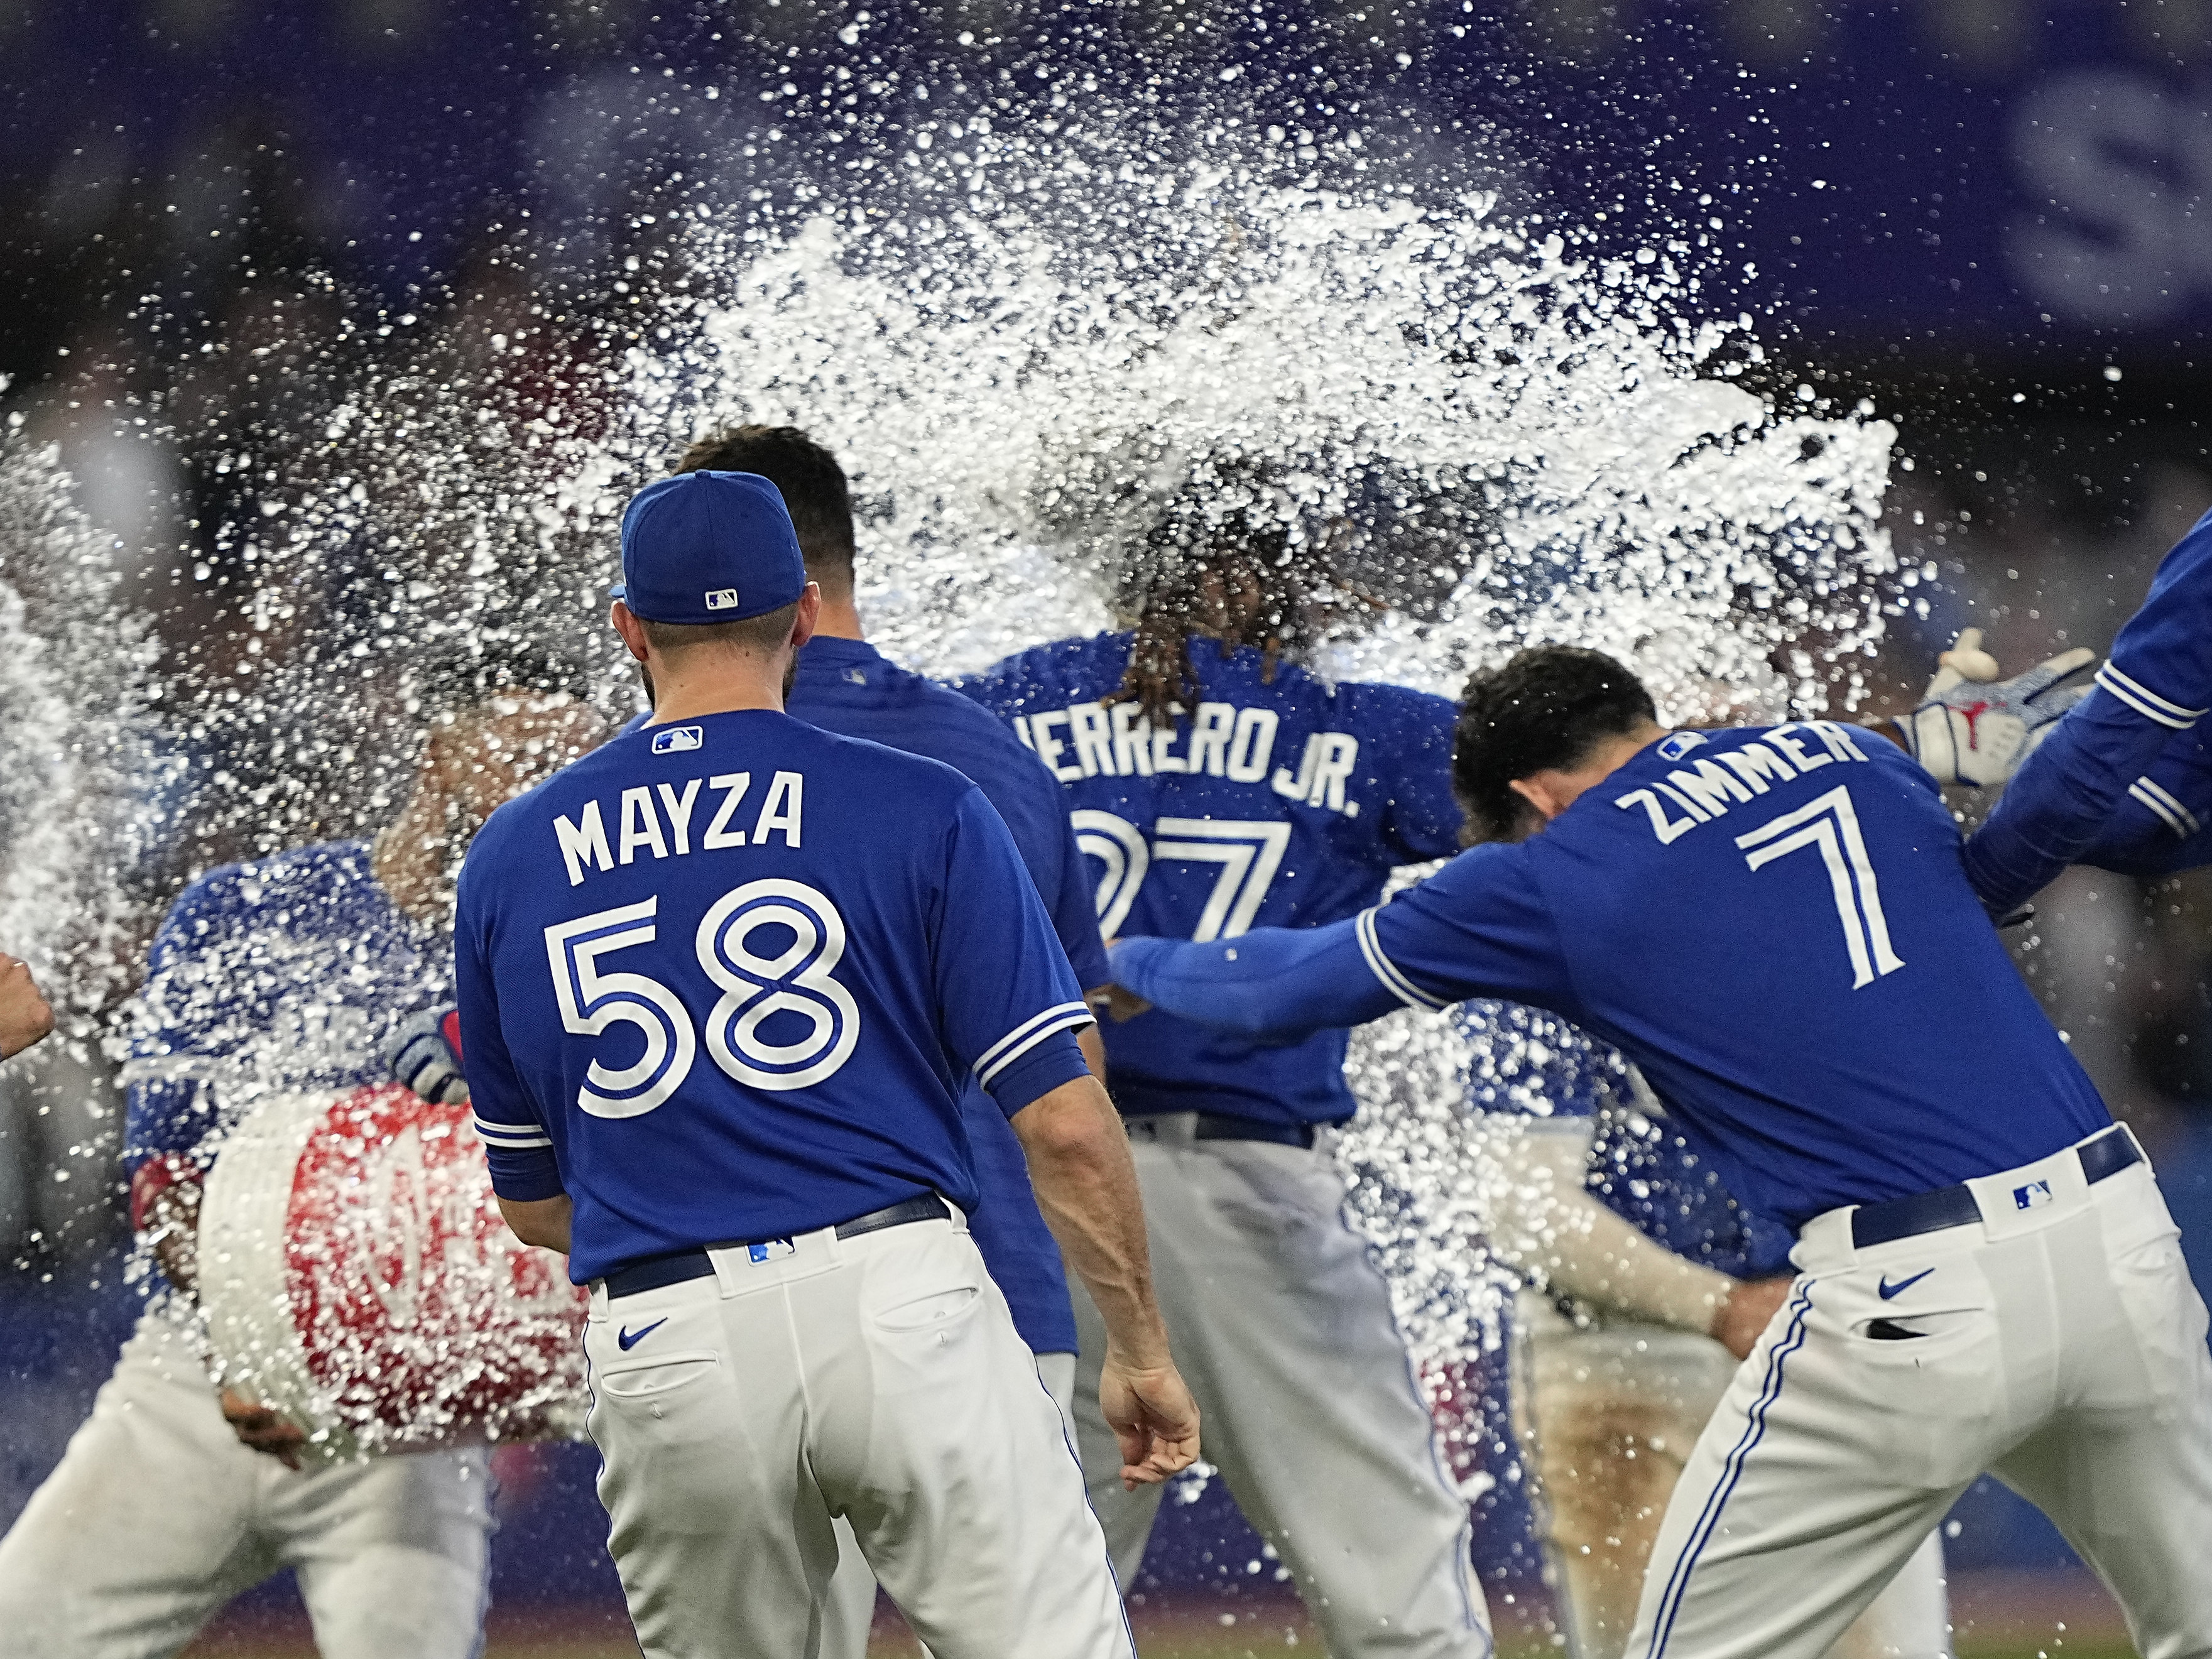 The BIGGEST Public Toronto Blue Jays Signing Event of 2022 presented by FW  Sports